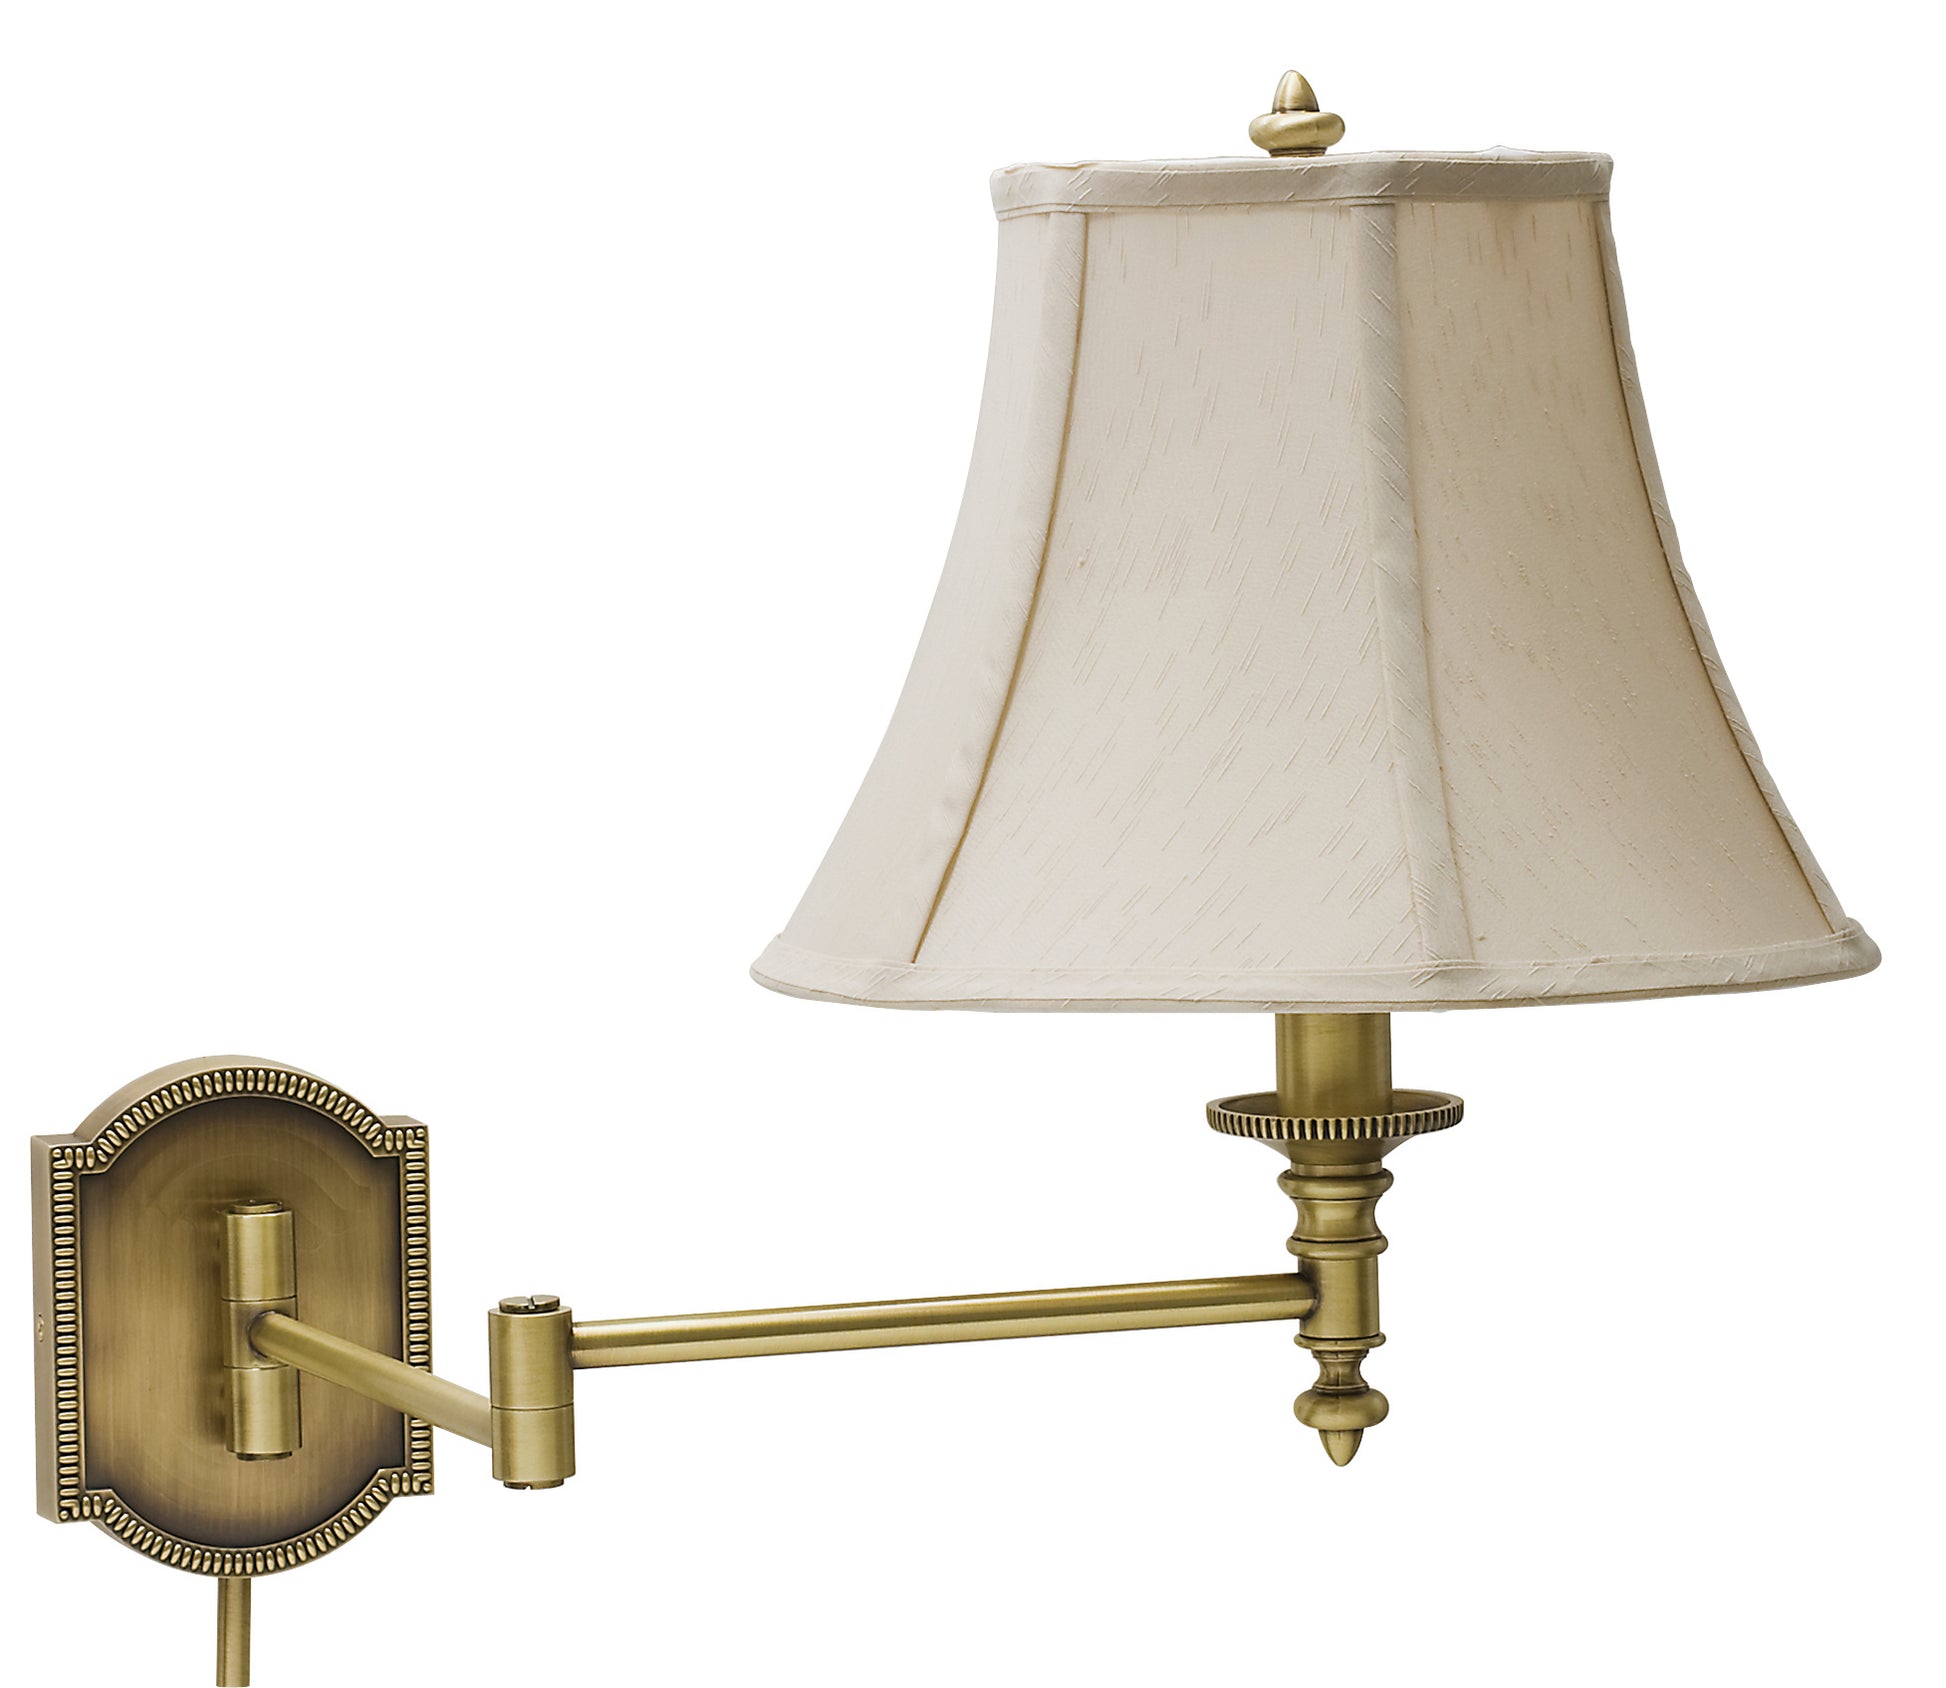 House of Troy Wall Swing Arm Lamp in Antique Brass WS761-AB